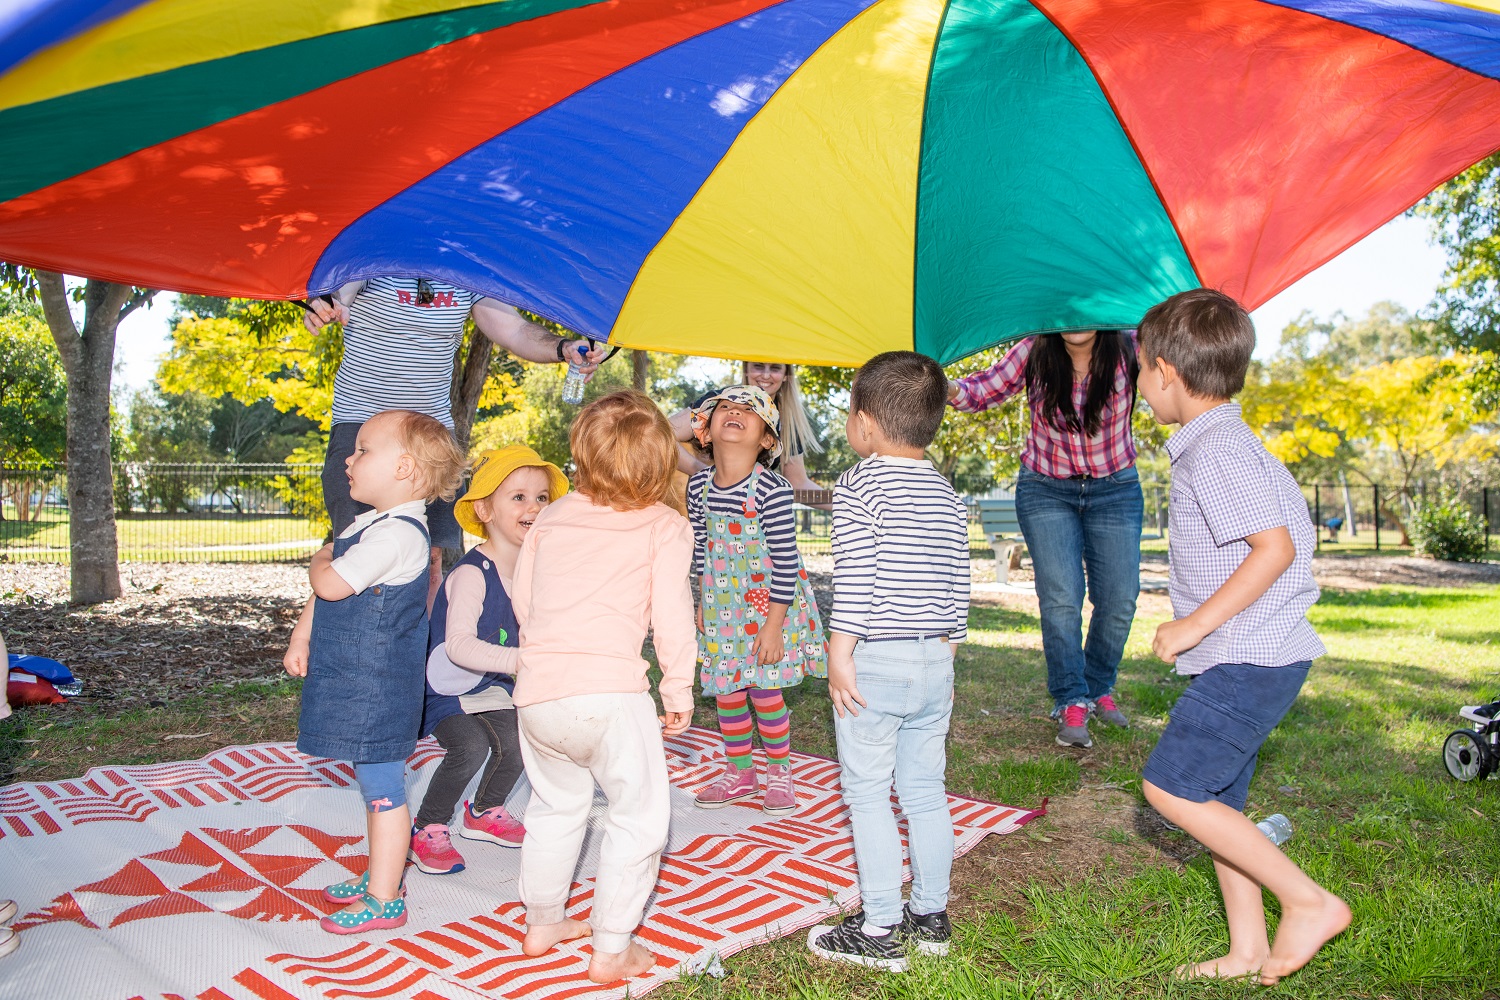 Children enjoying parachute play at playgroup in a local park